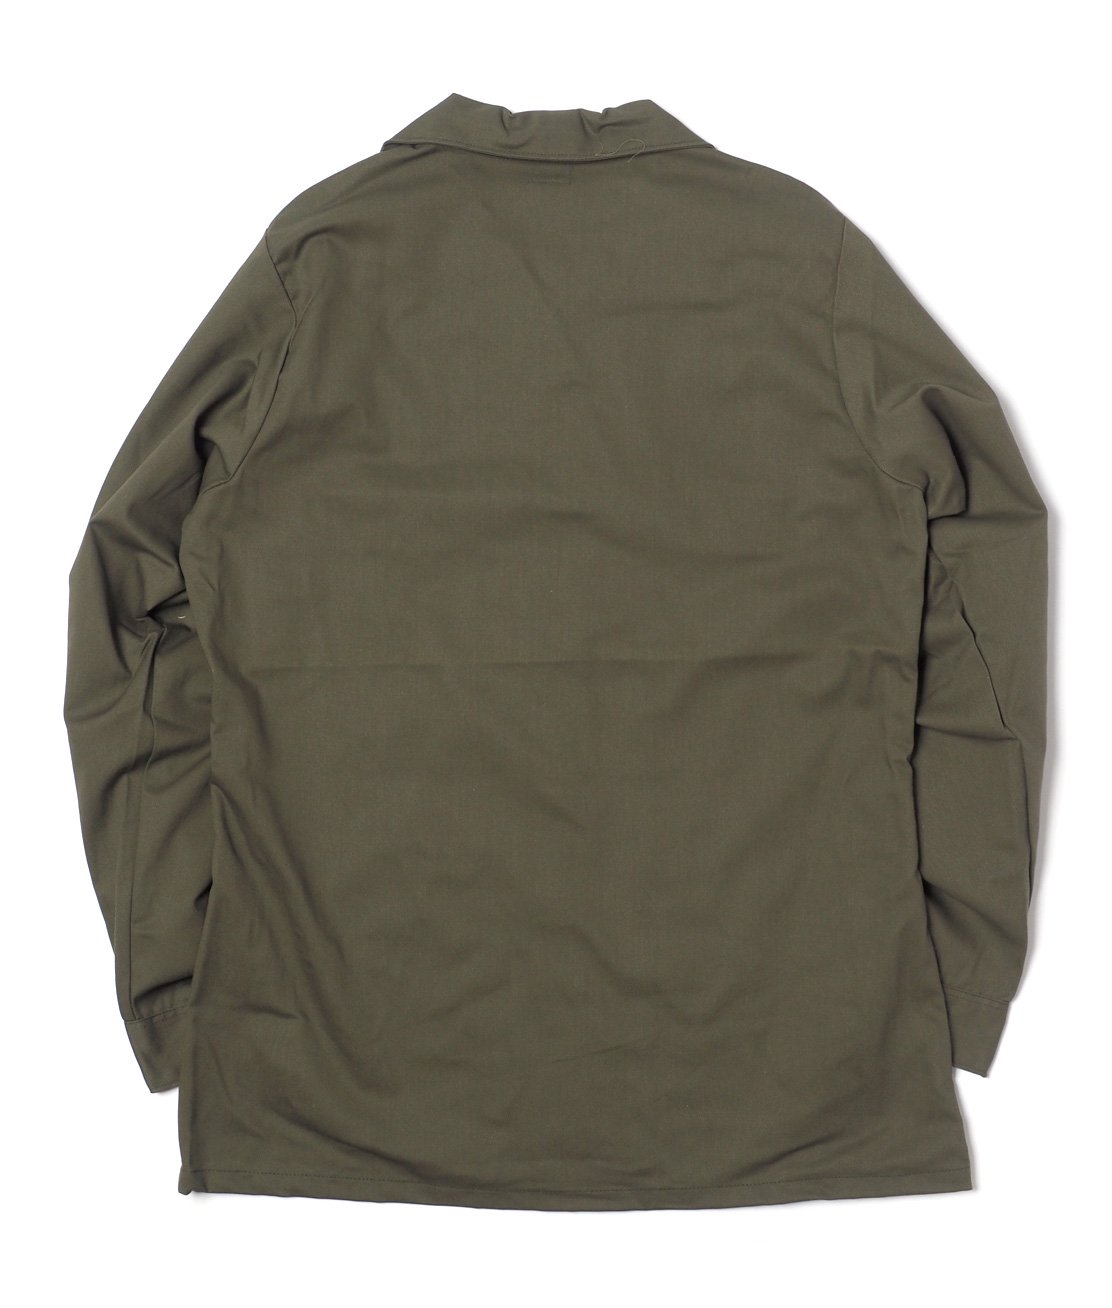 【DEAD STOCK】80s US ARMY UTILITY SHIRT - OLIVE GREEN